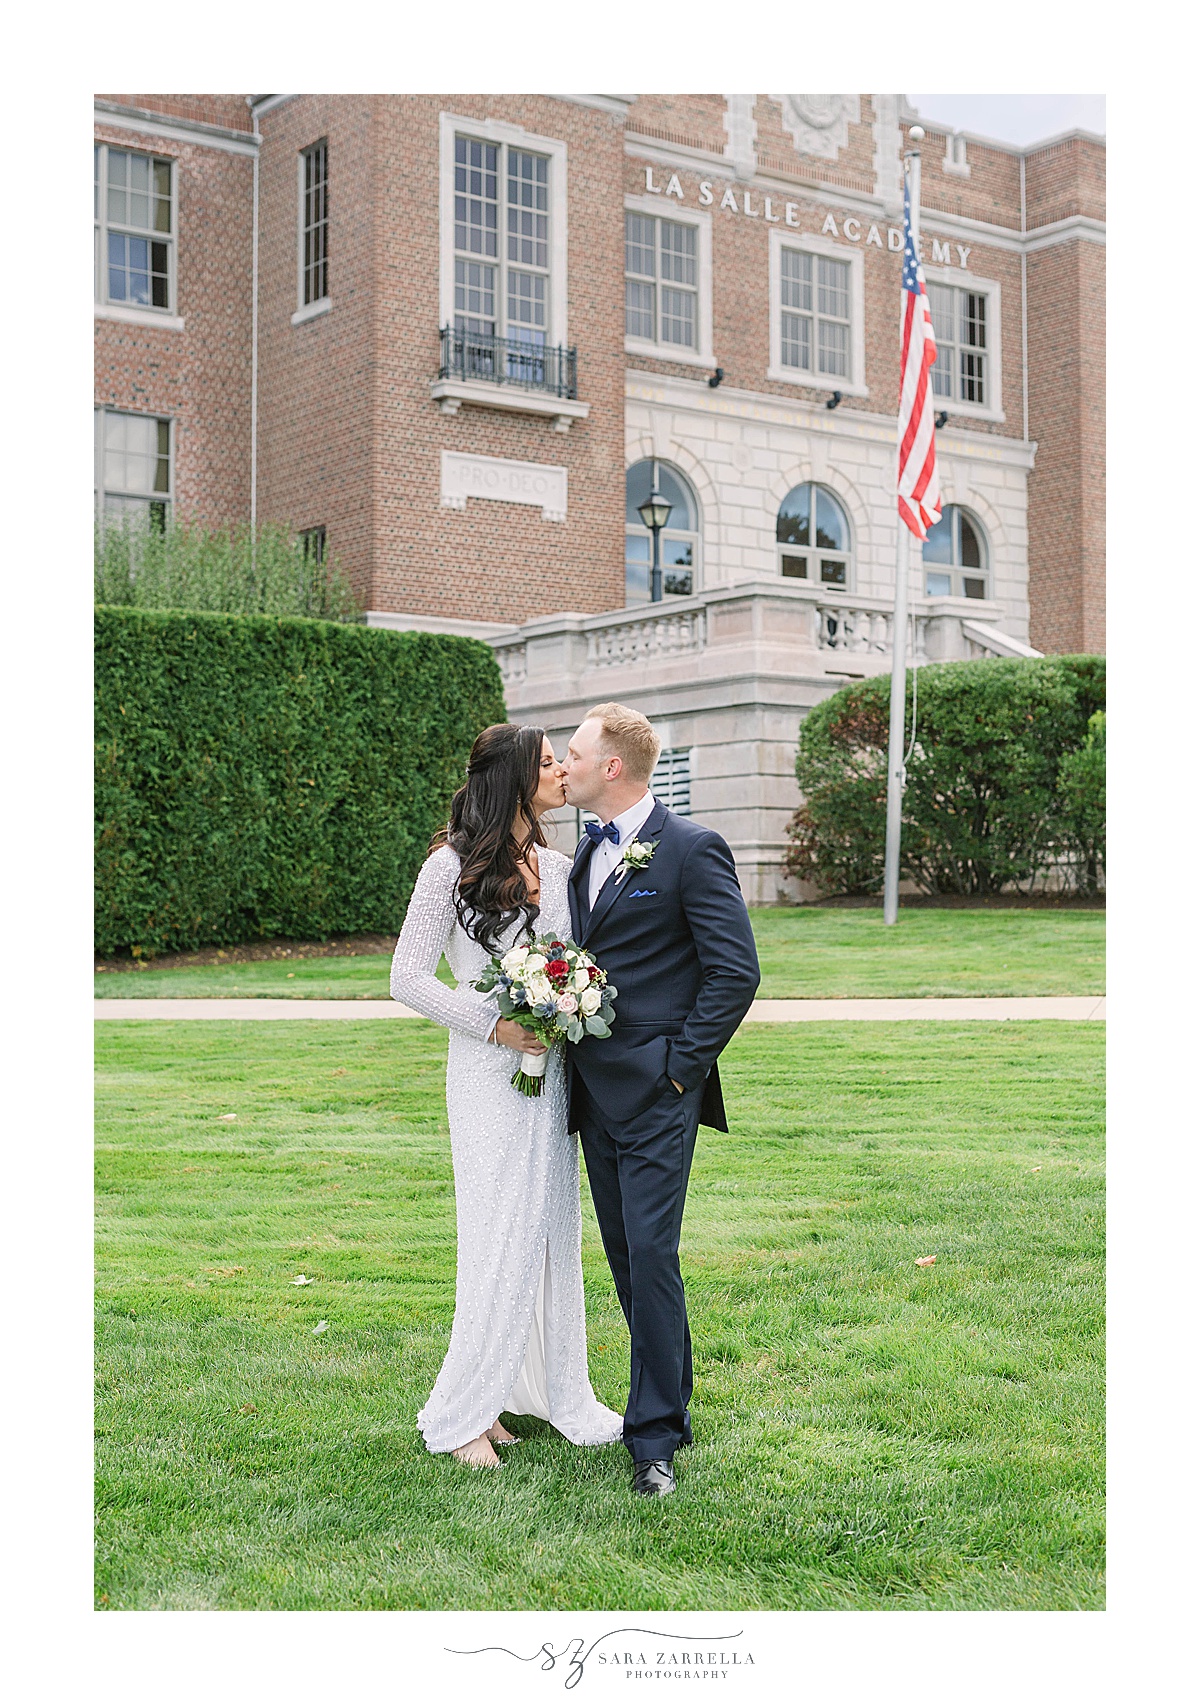 newlyweds kiss on lawn at La Salle Academy Chapel